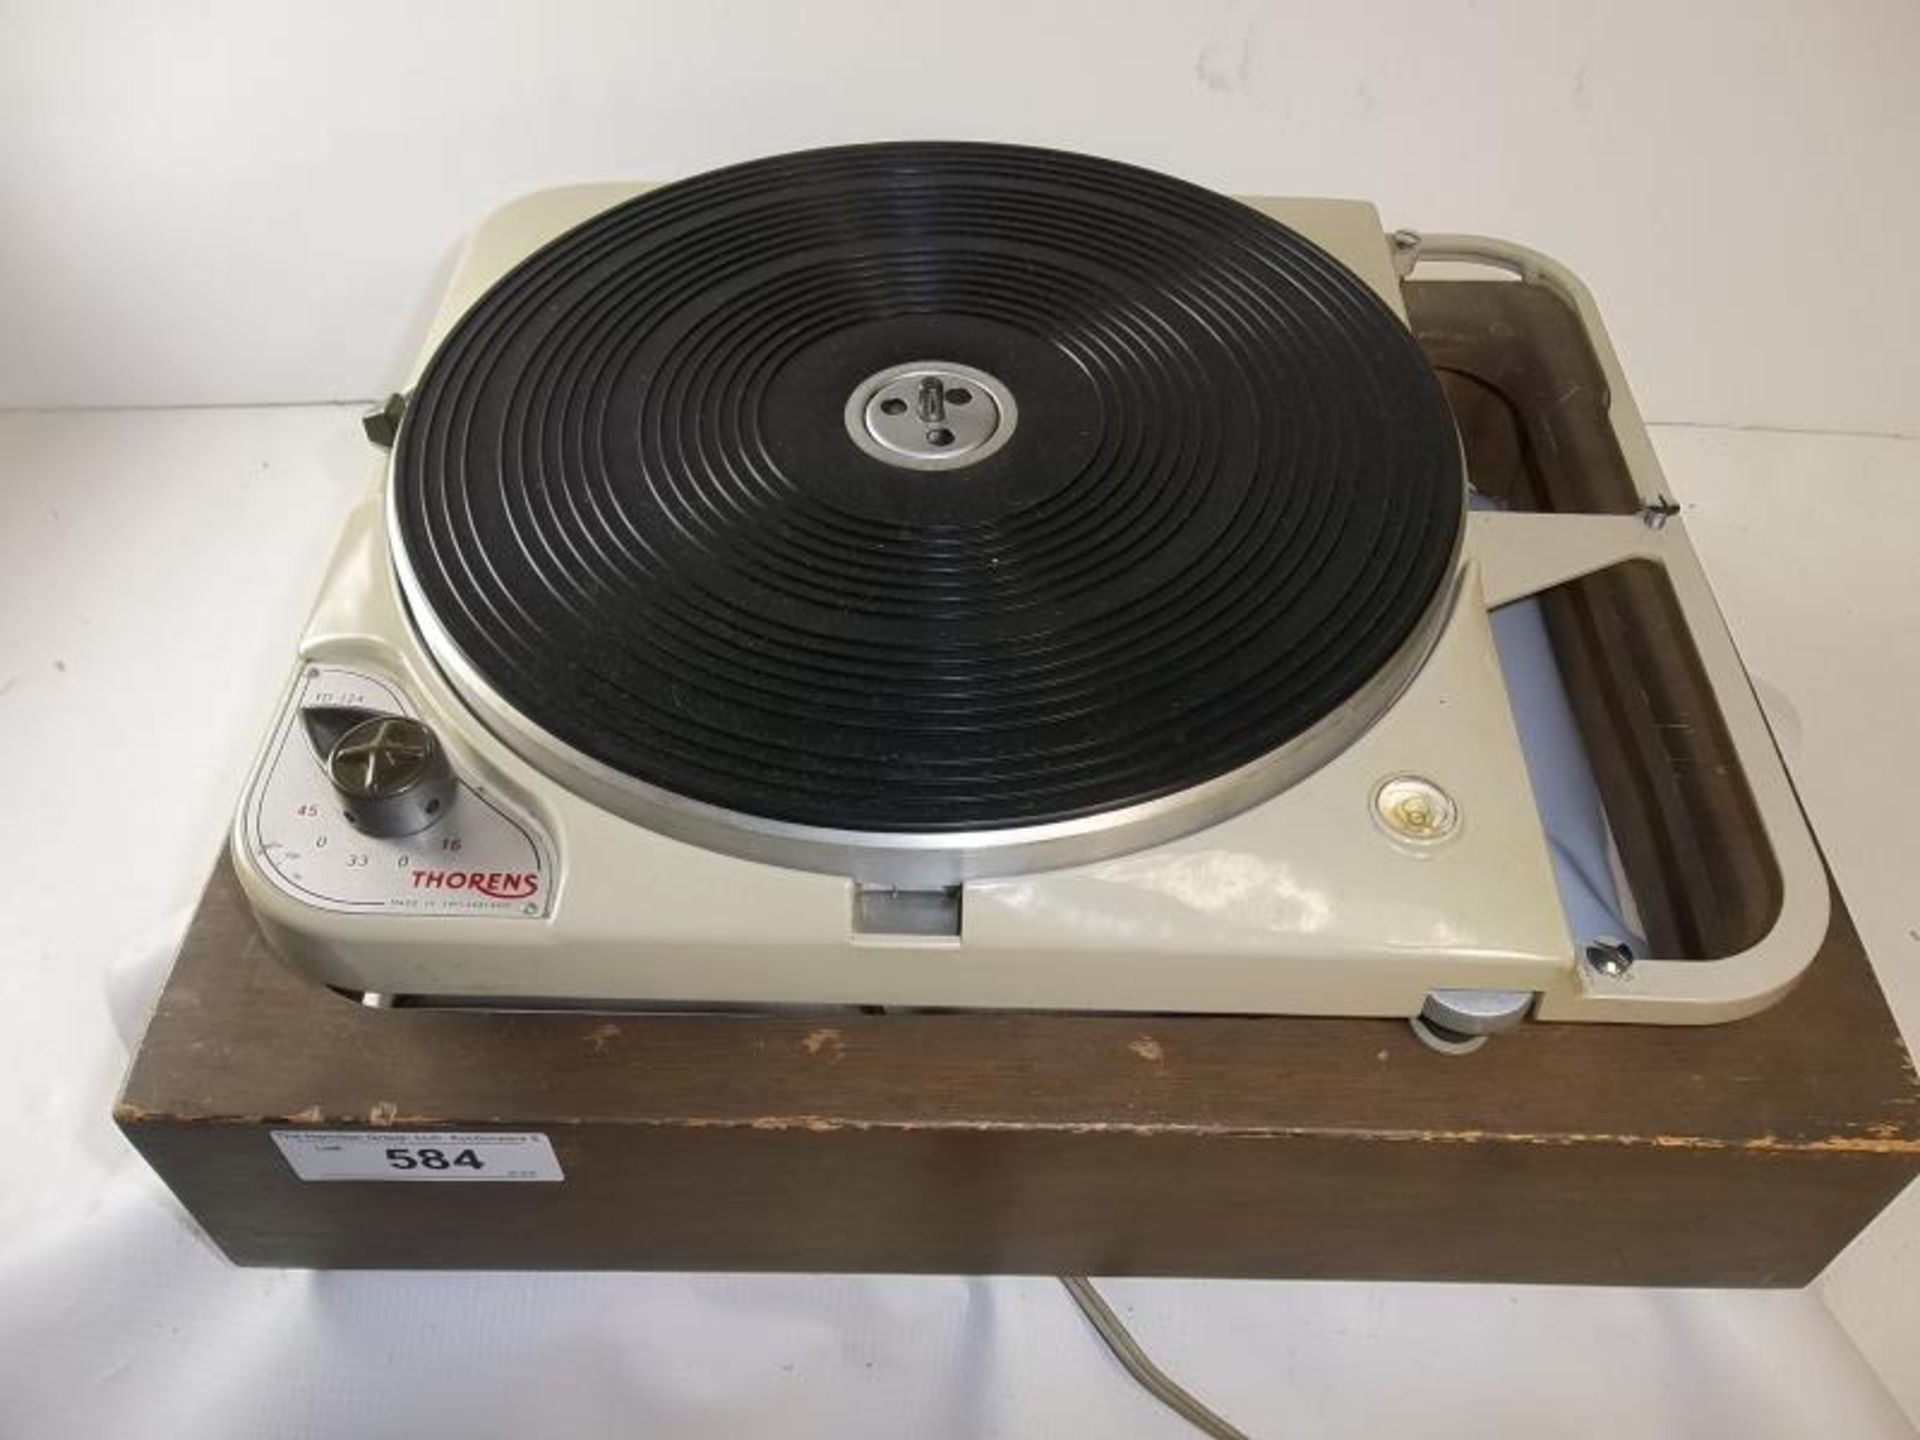 Thorens TD-124 turn table, #40946, made in Switzerland, 16, 33, 45, 78, no arm board or arm, base is